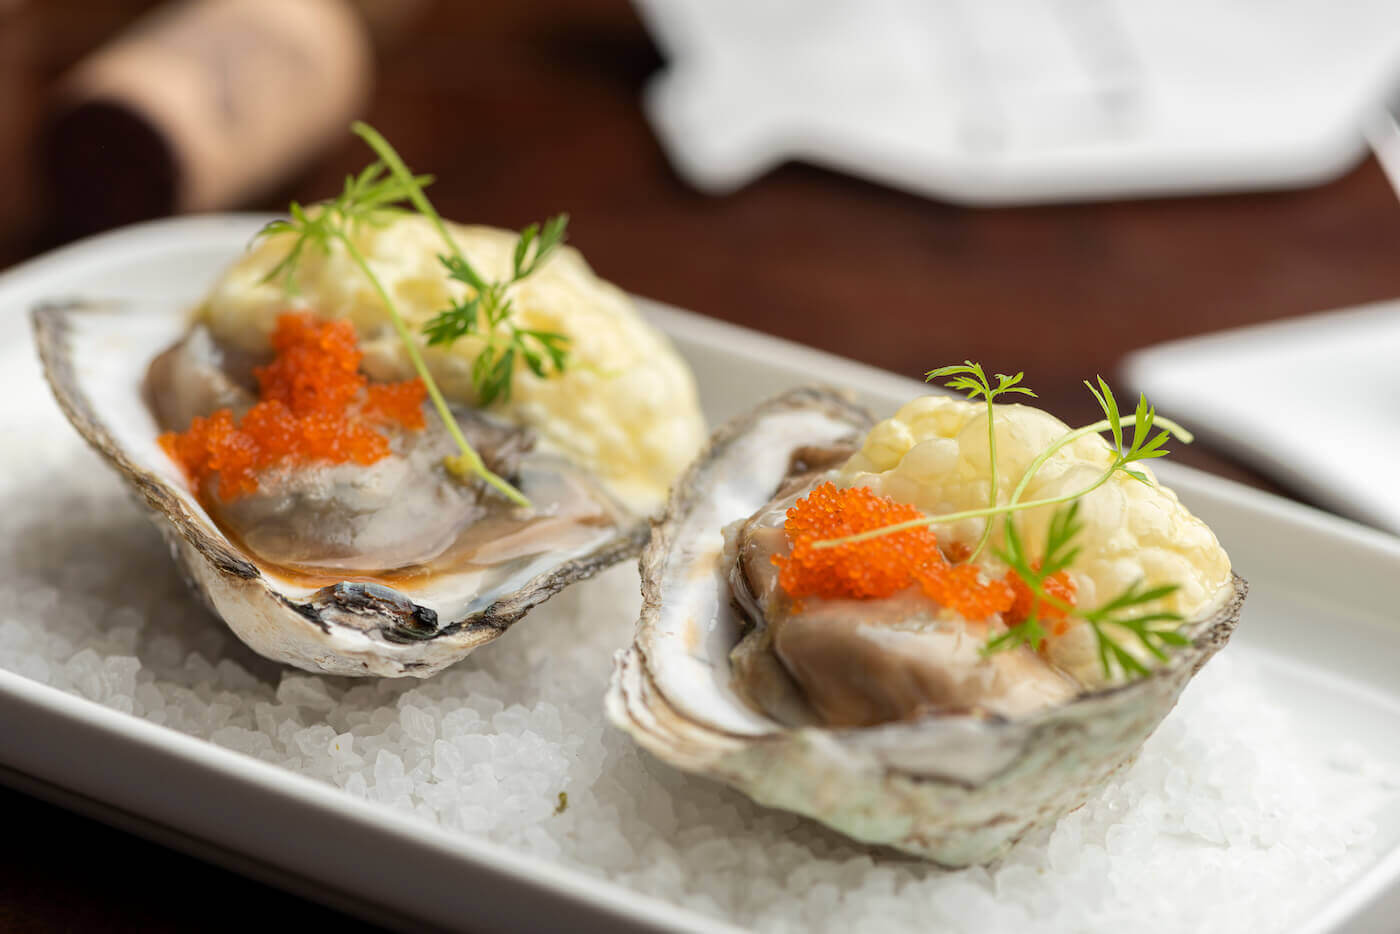 Oysters garnished with red caviar on salt and plate